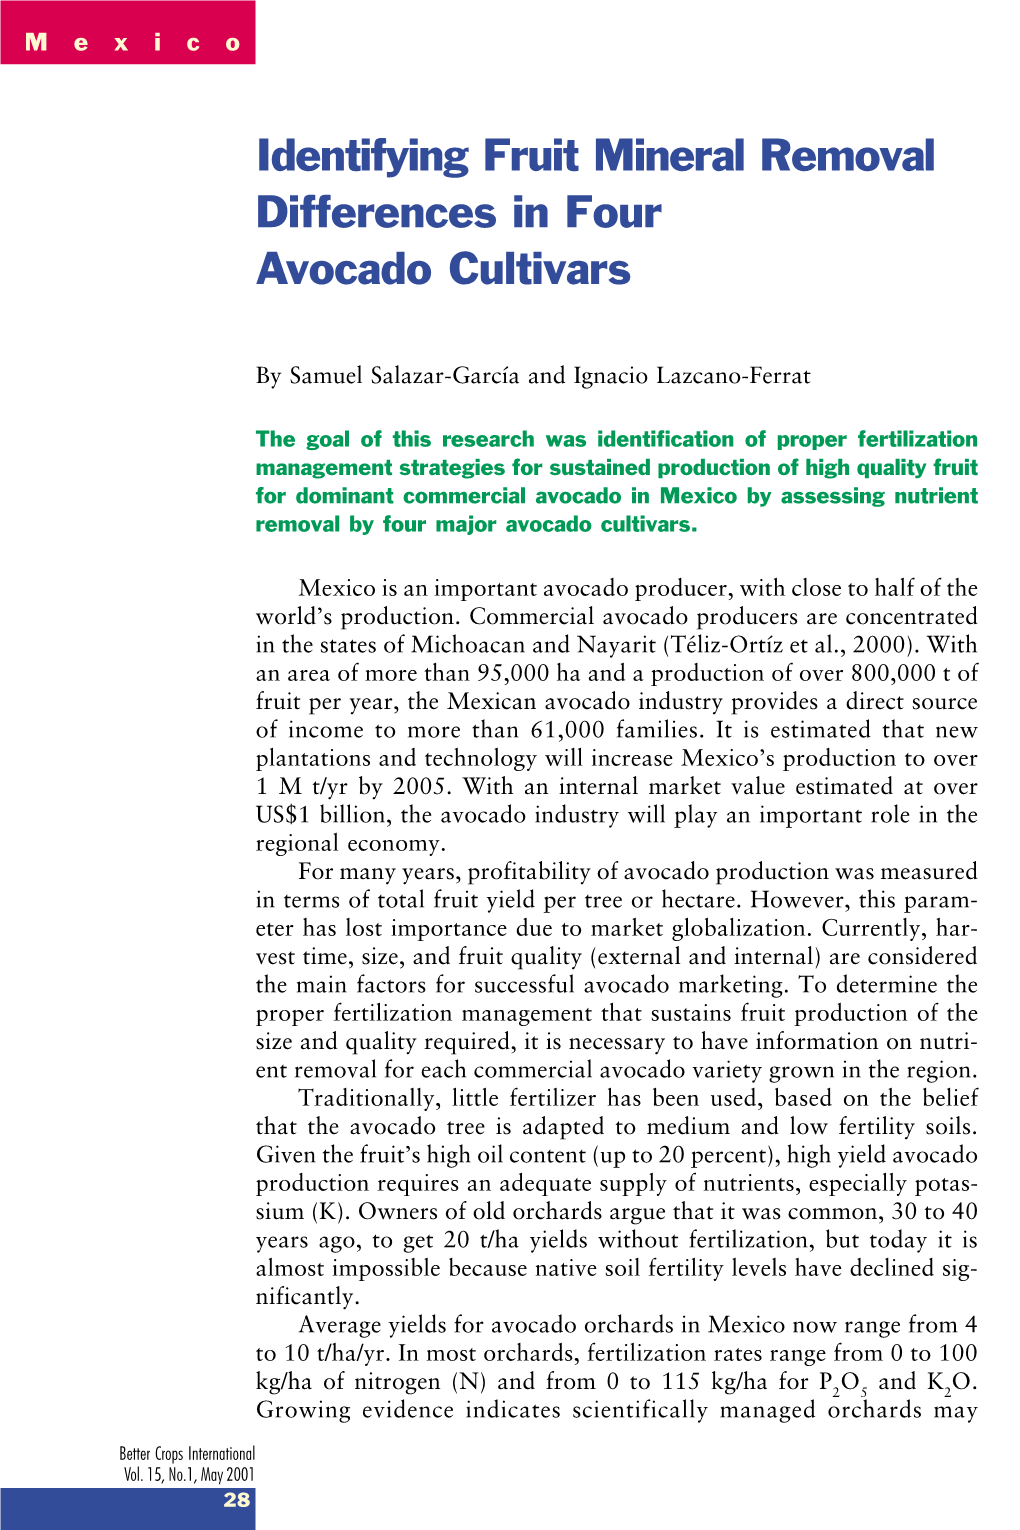 Identifying Fruit Mineral Removal Differences in Four Avocado Cultivars